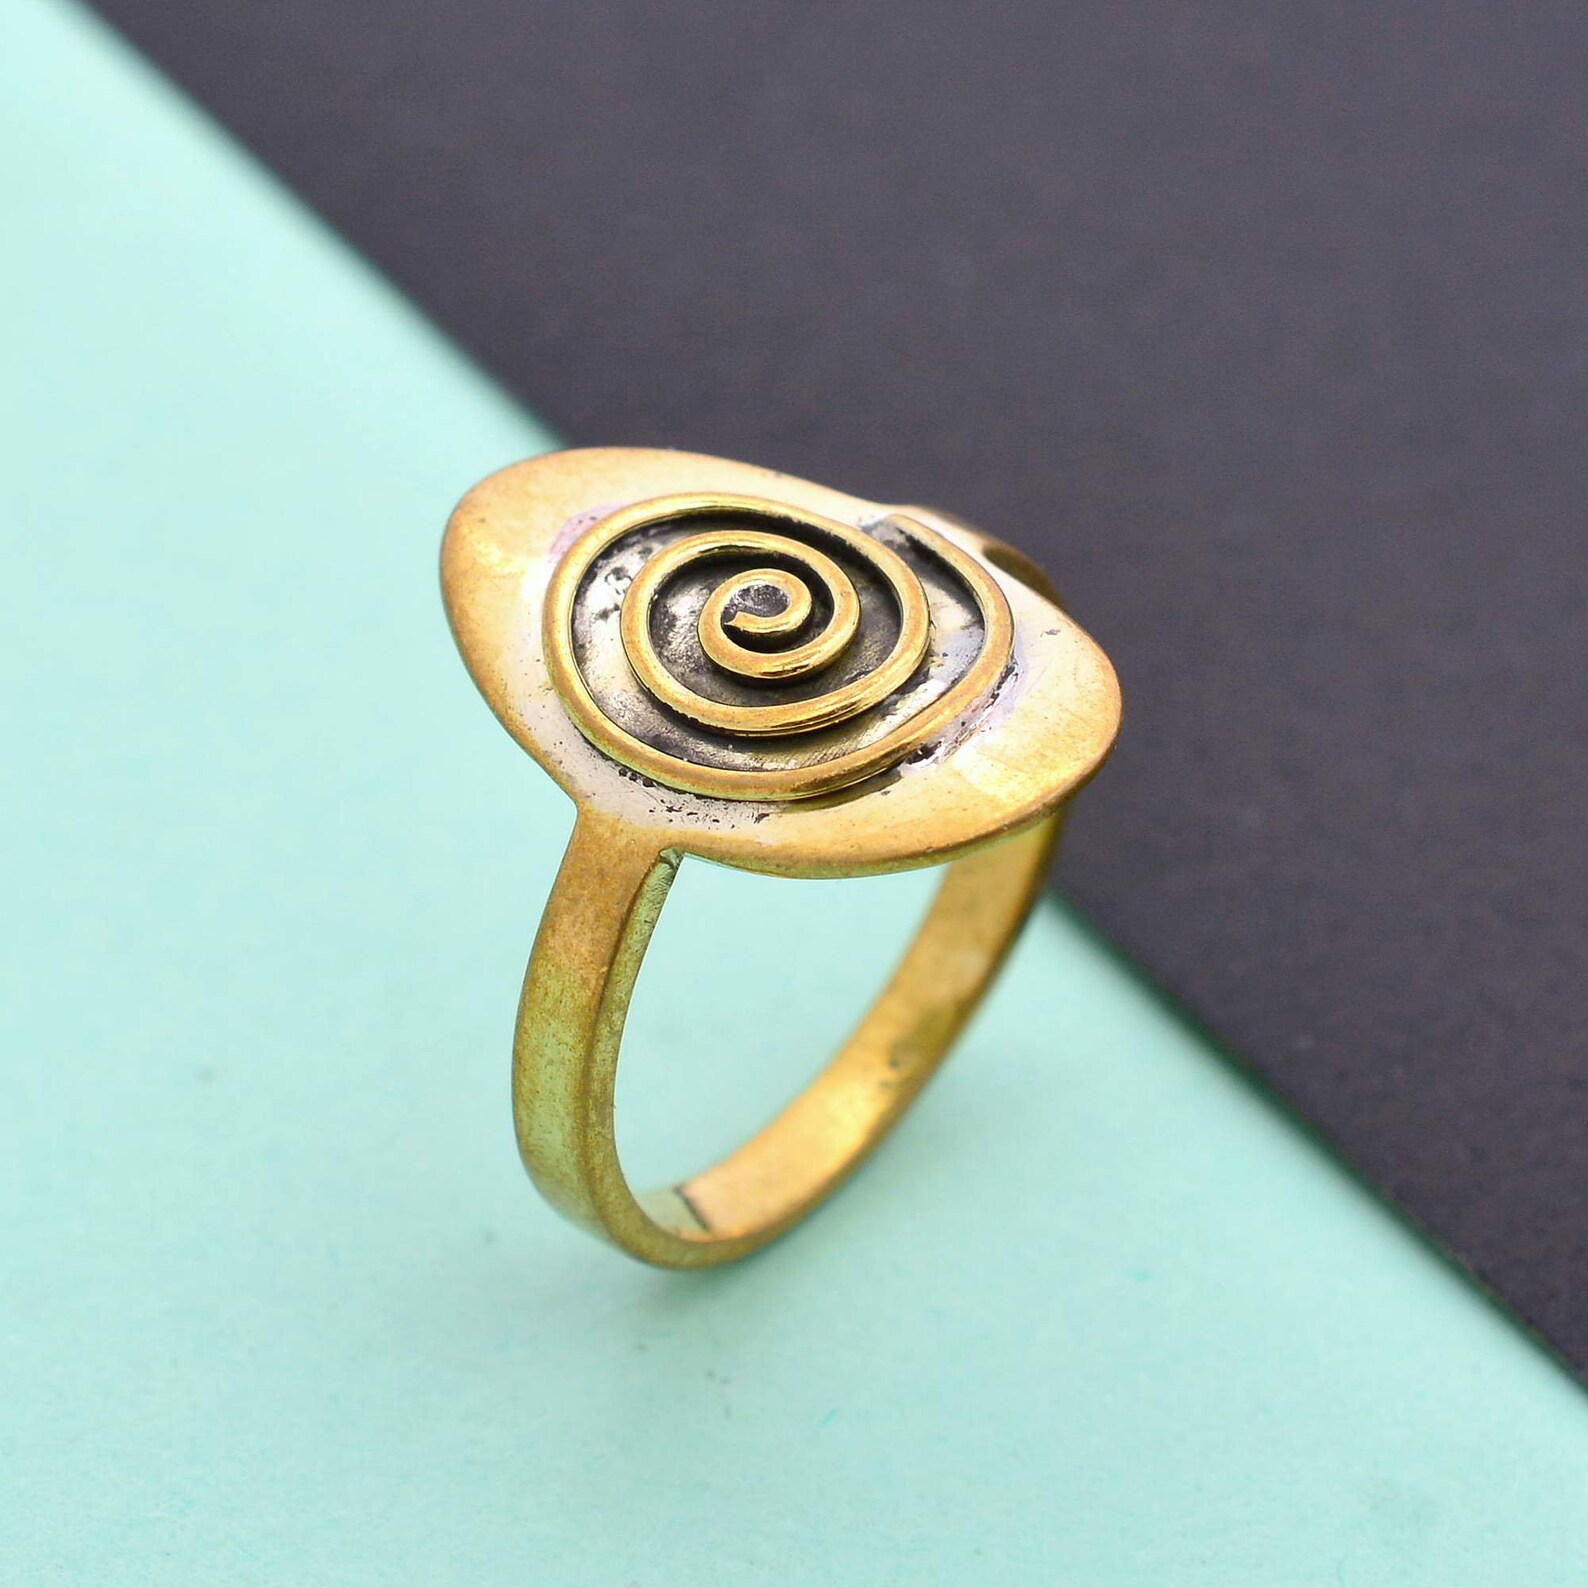 A spiral ring made of Brass is going to add shine to your | Etsy